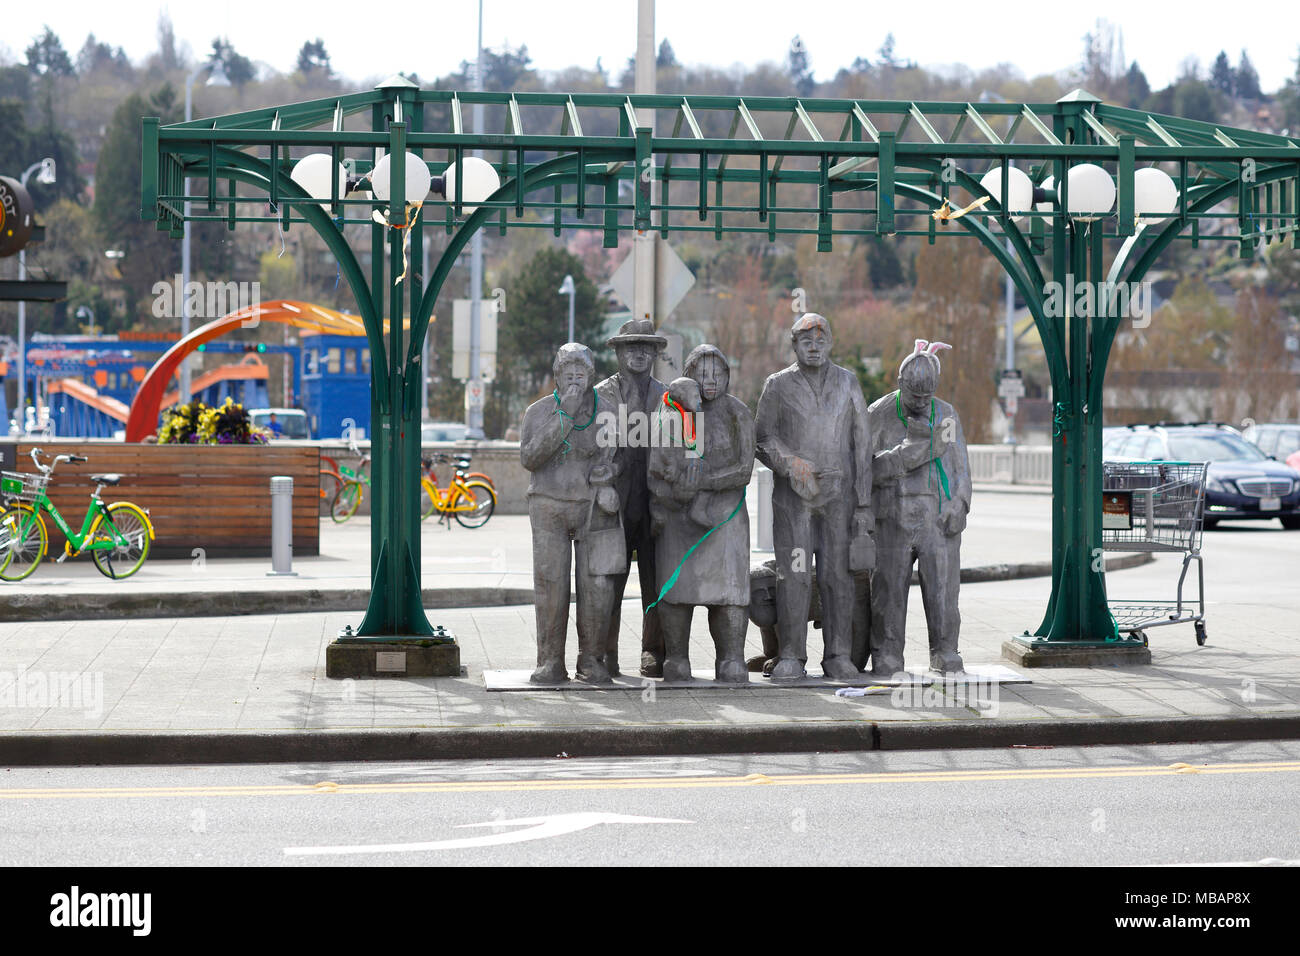 Waiting for the Interurban sculpture in the Fremont neighborhood of Seattle, Washington. Stock Photo